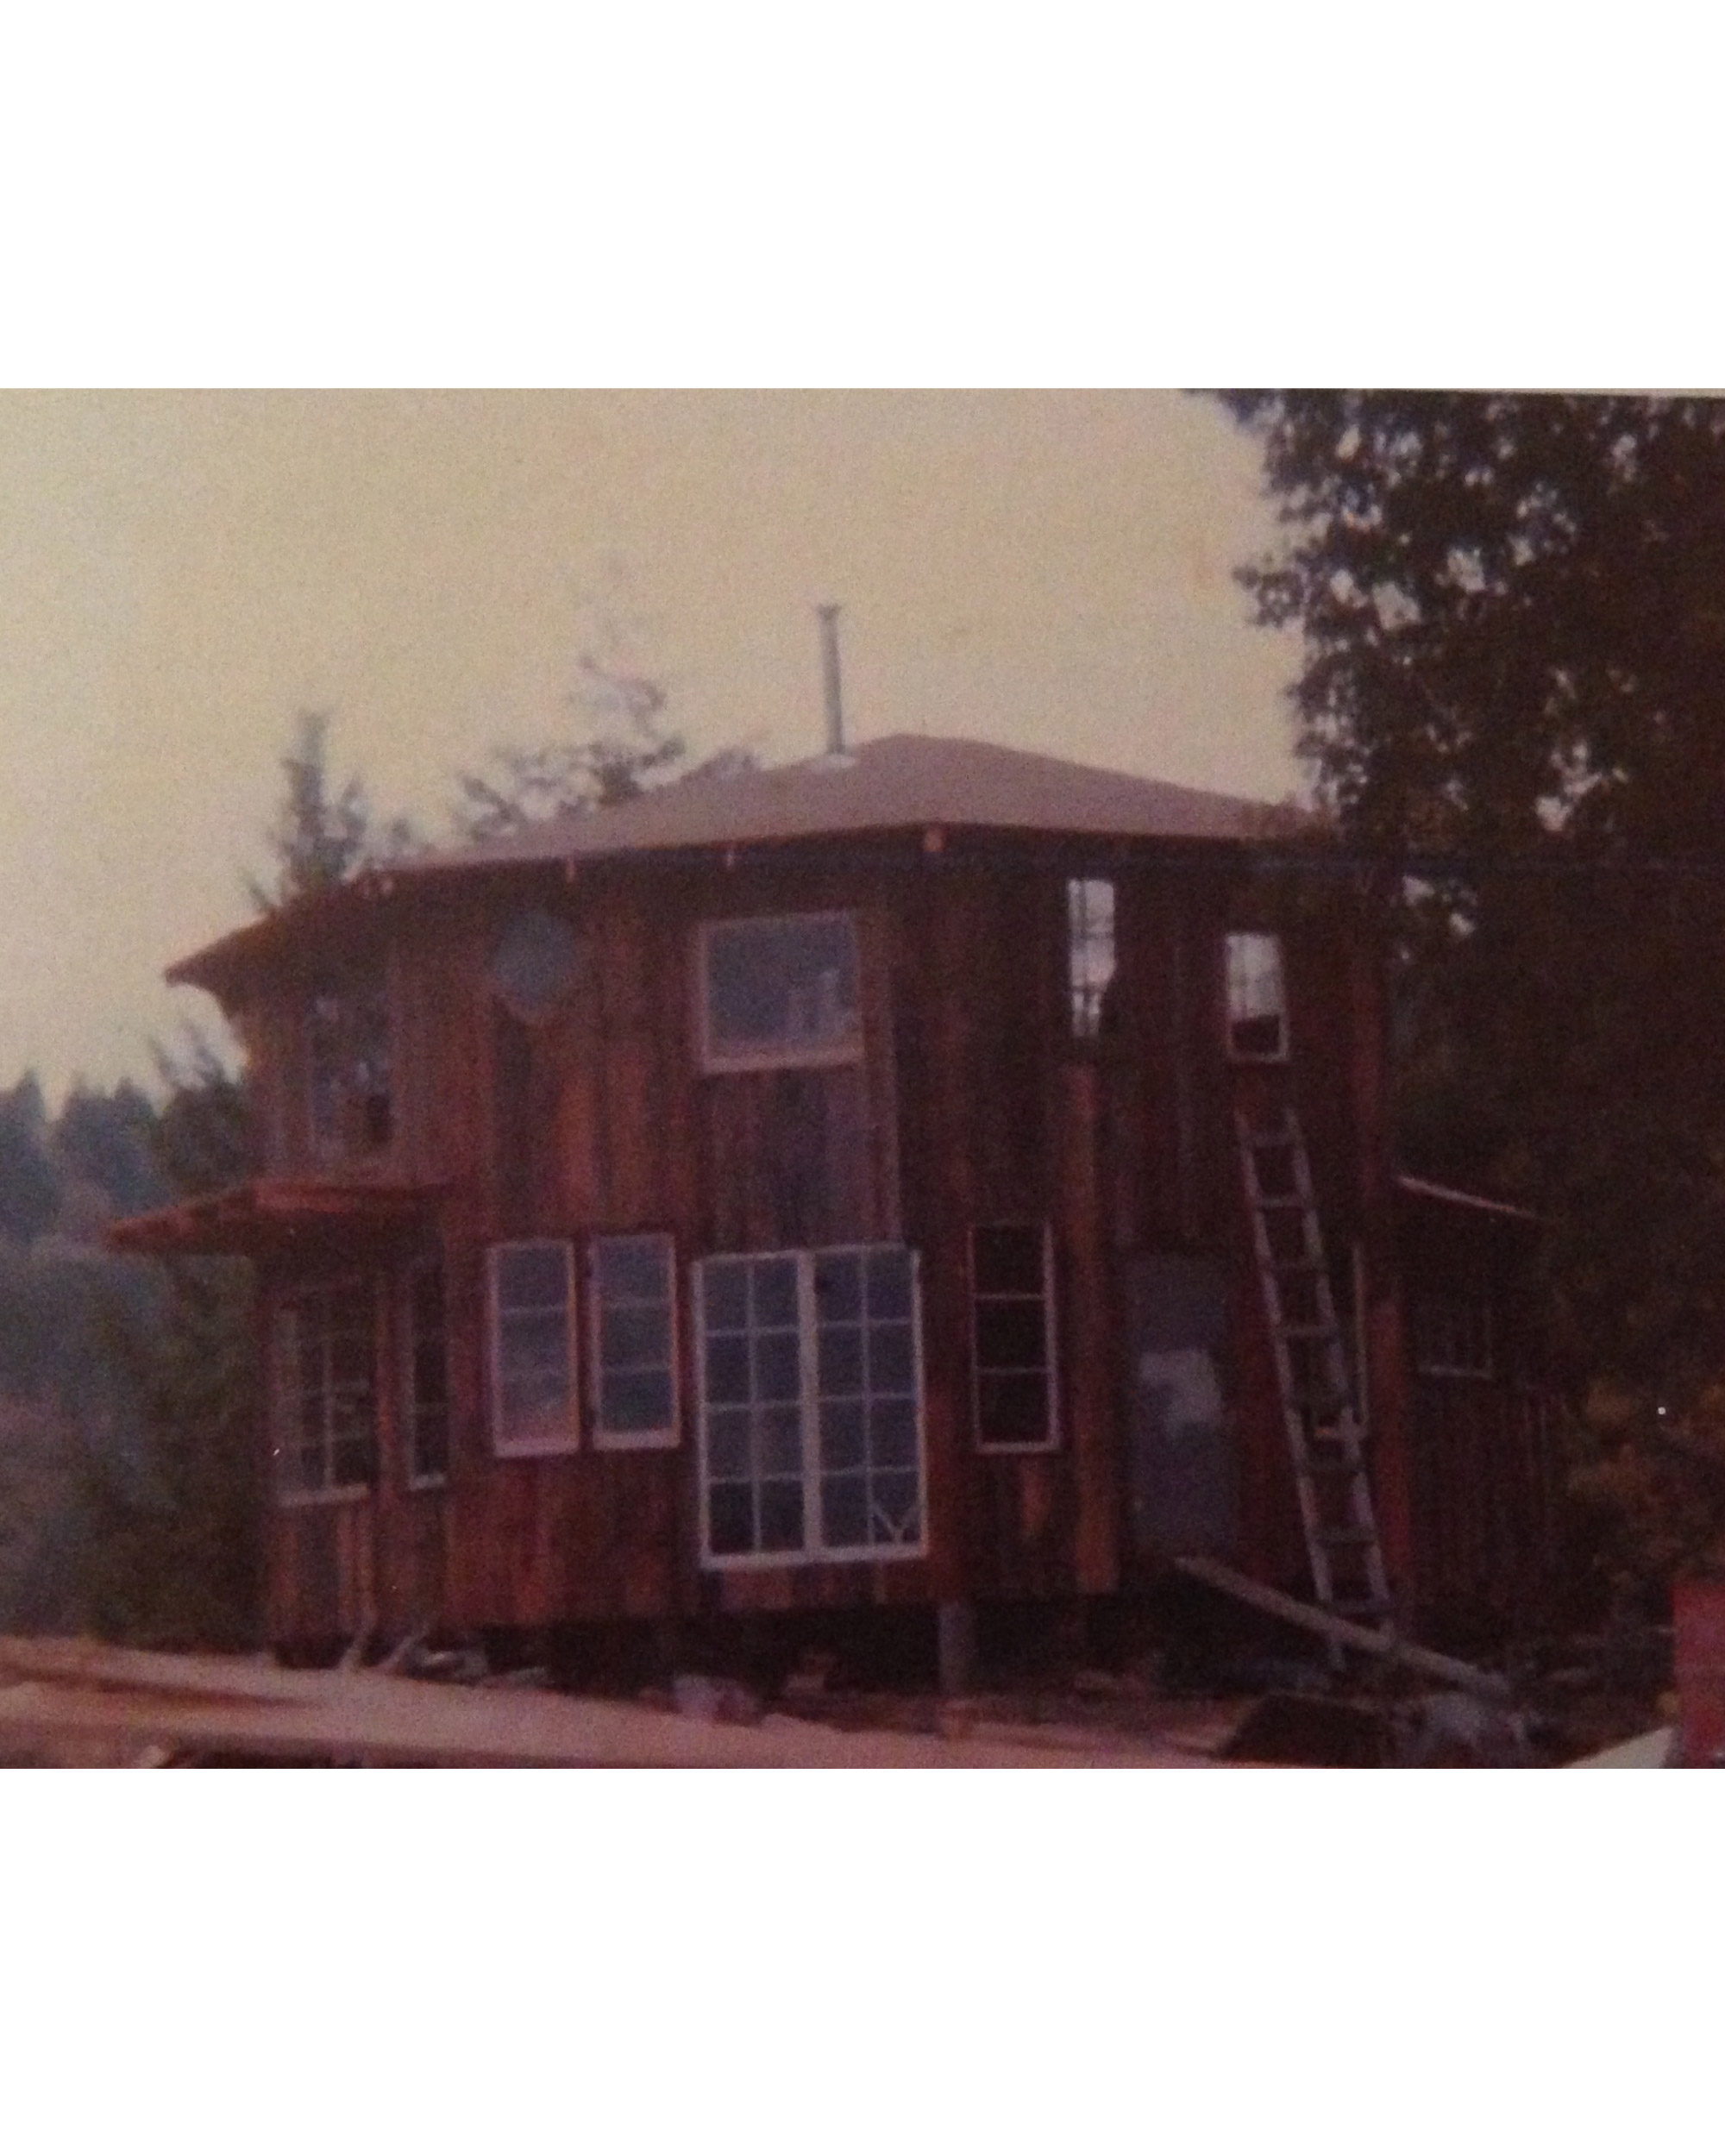 An original back-to-the-land commune house in northern California.